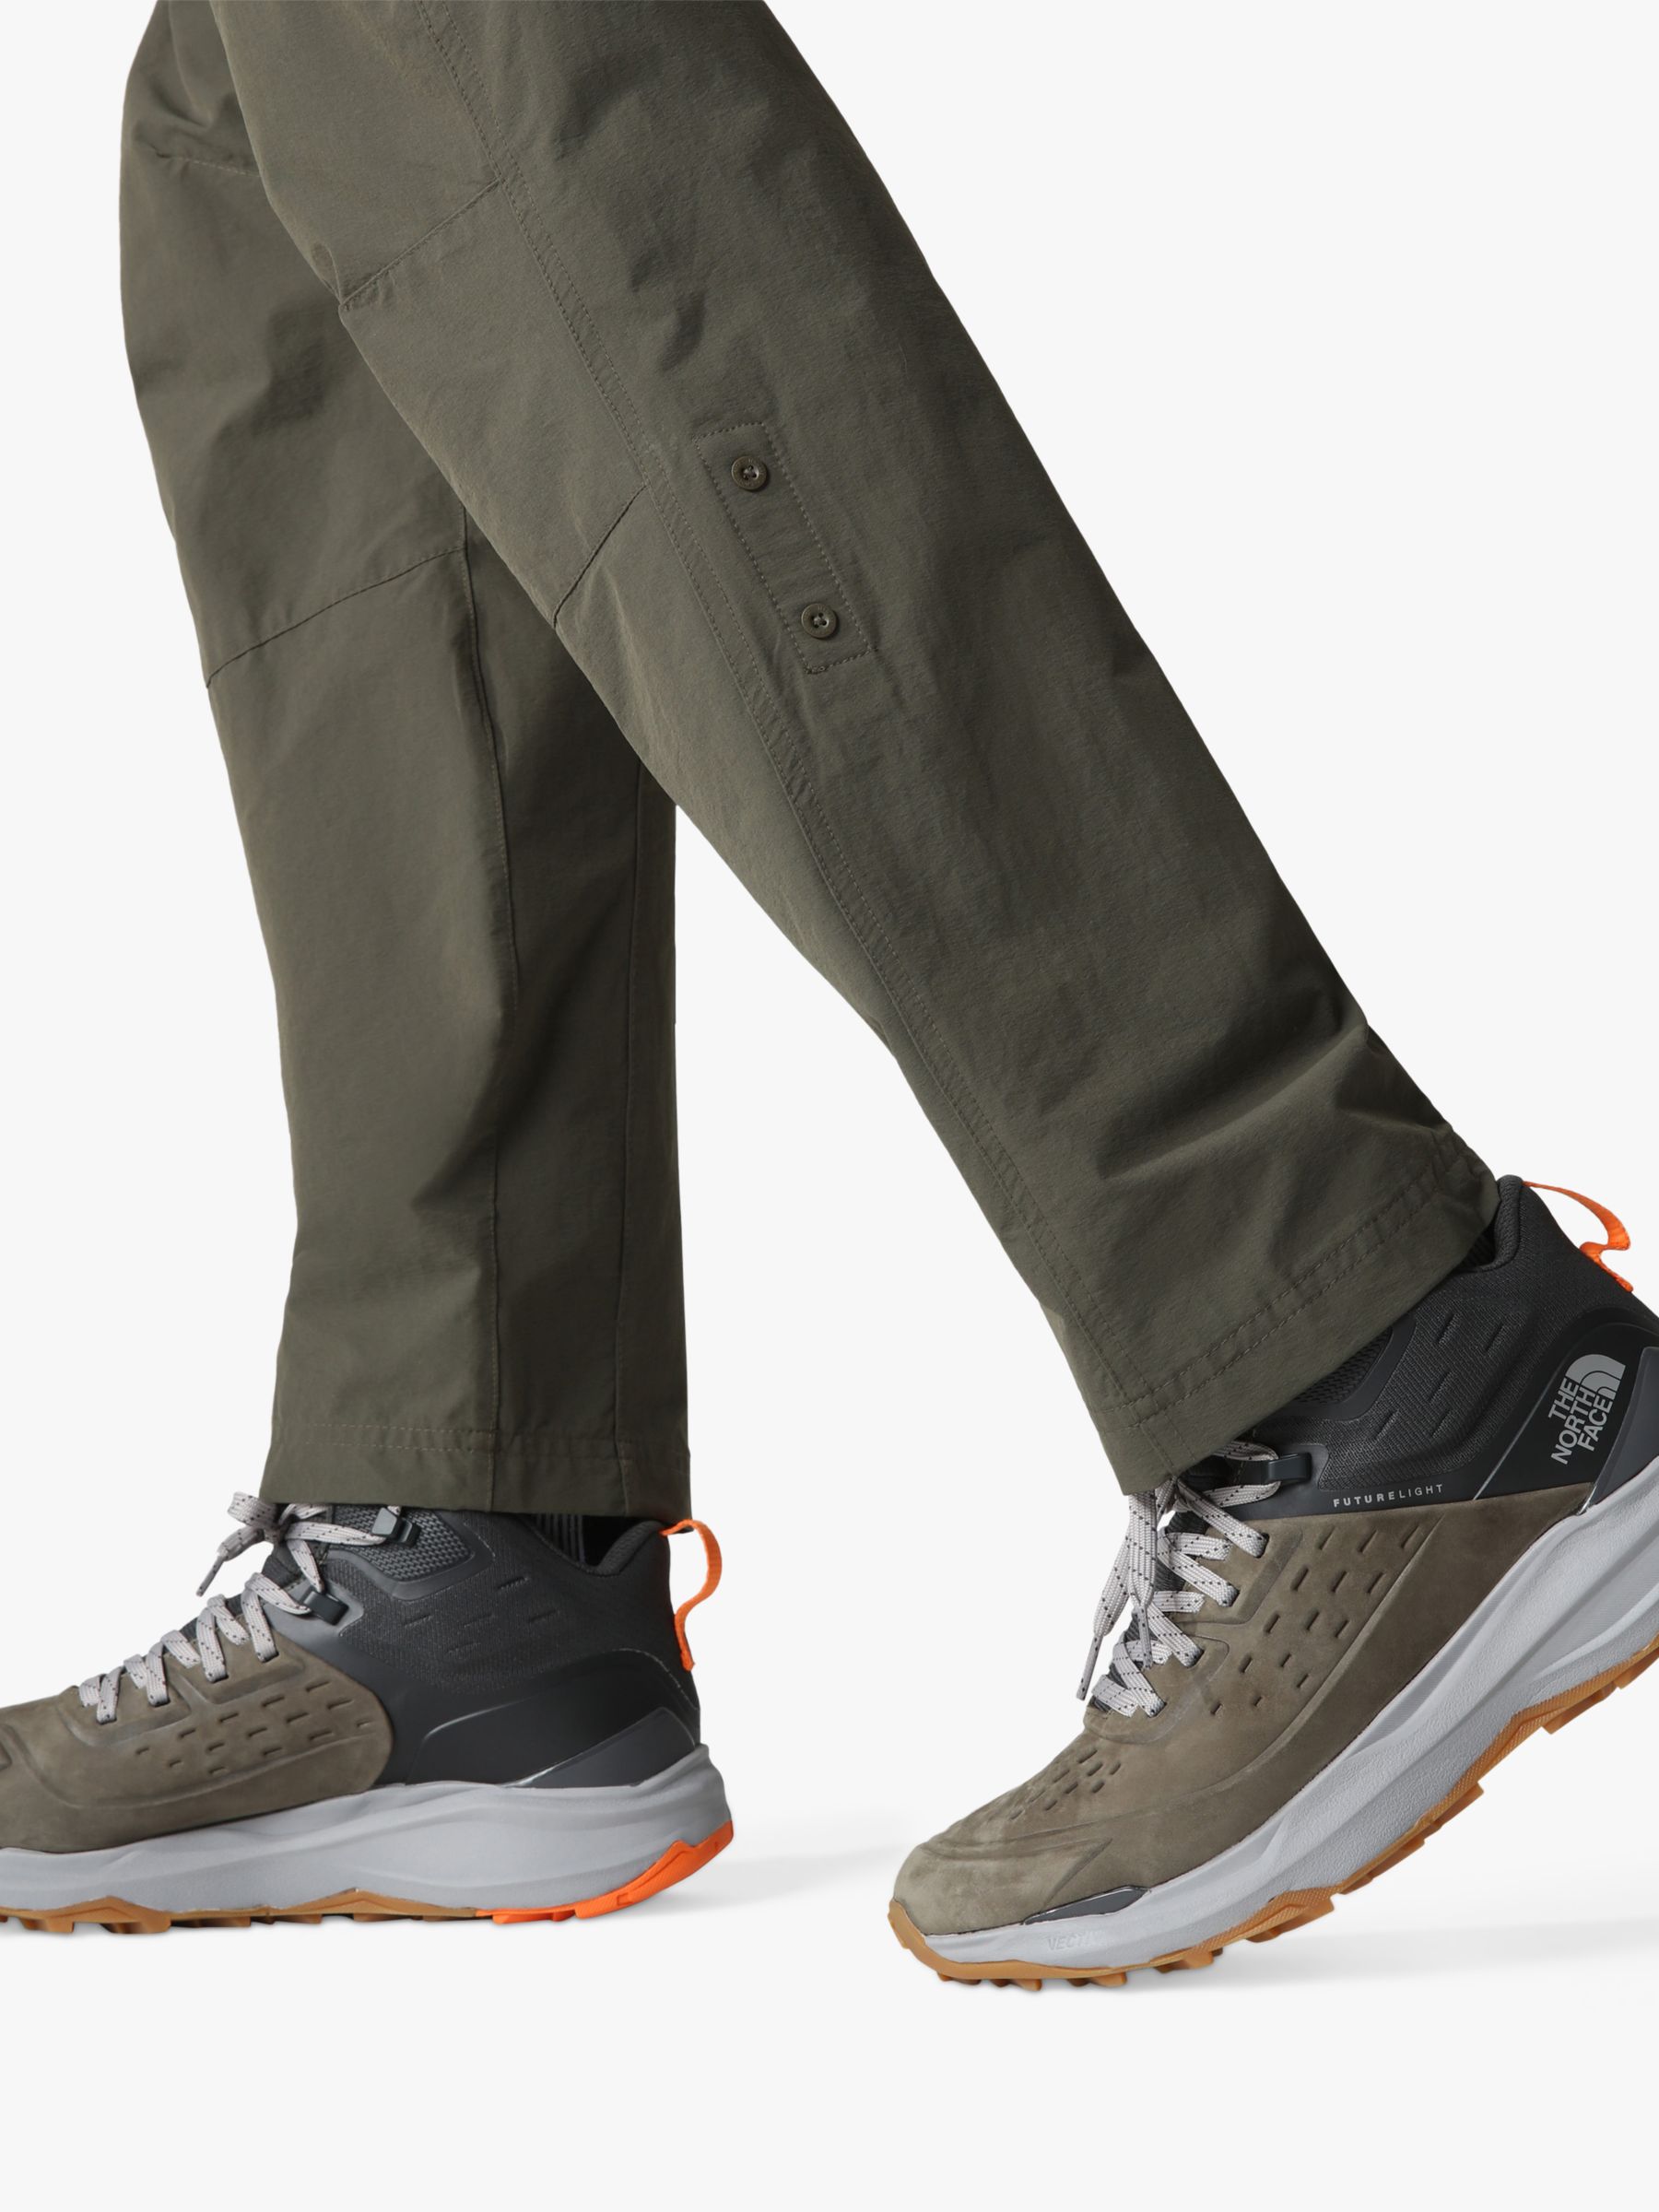 Buy The North Face VECTIV™ Exploris II Leather Men's Hiking Boots Online at johnlewis.com